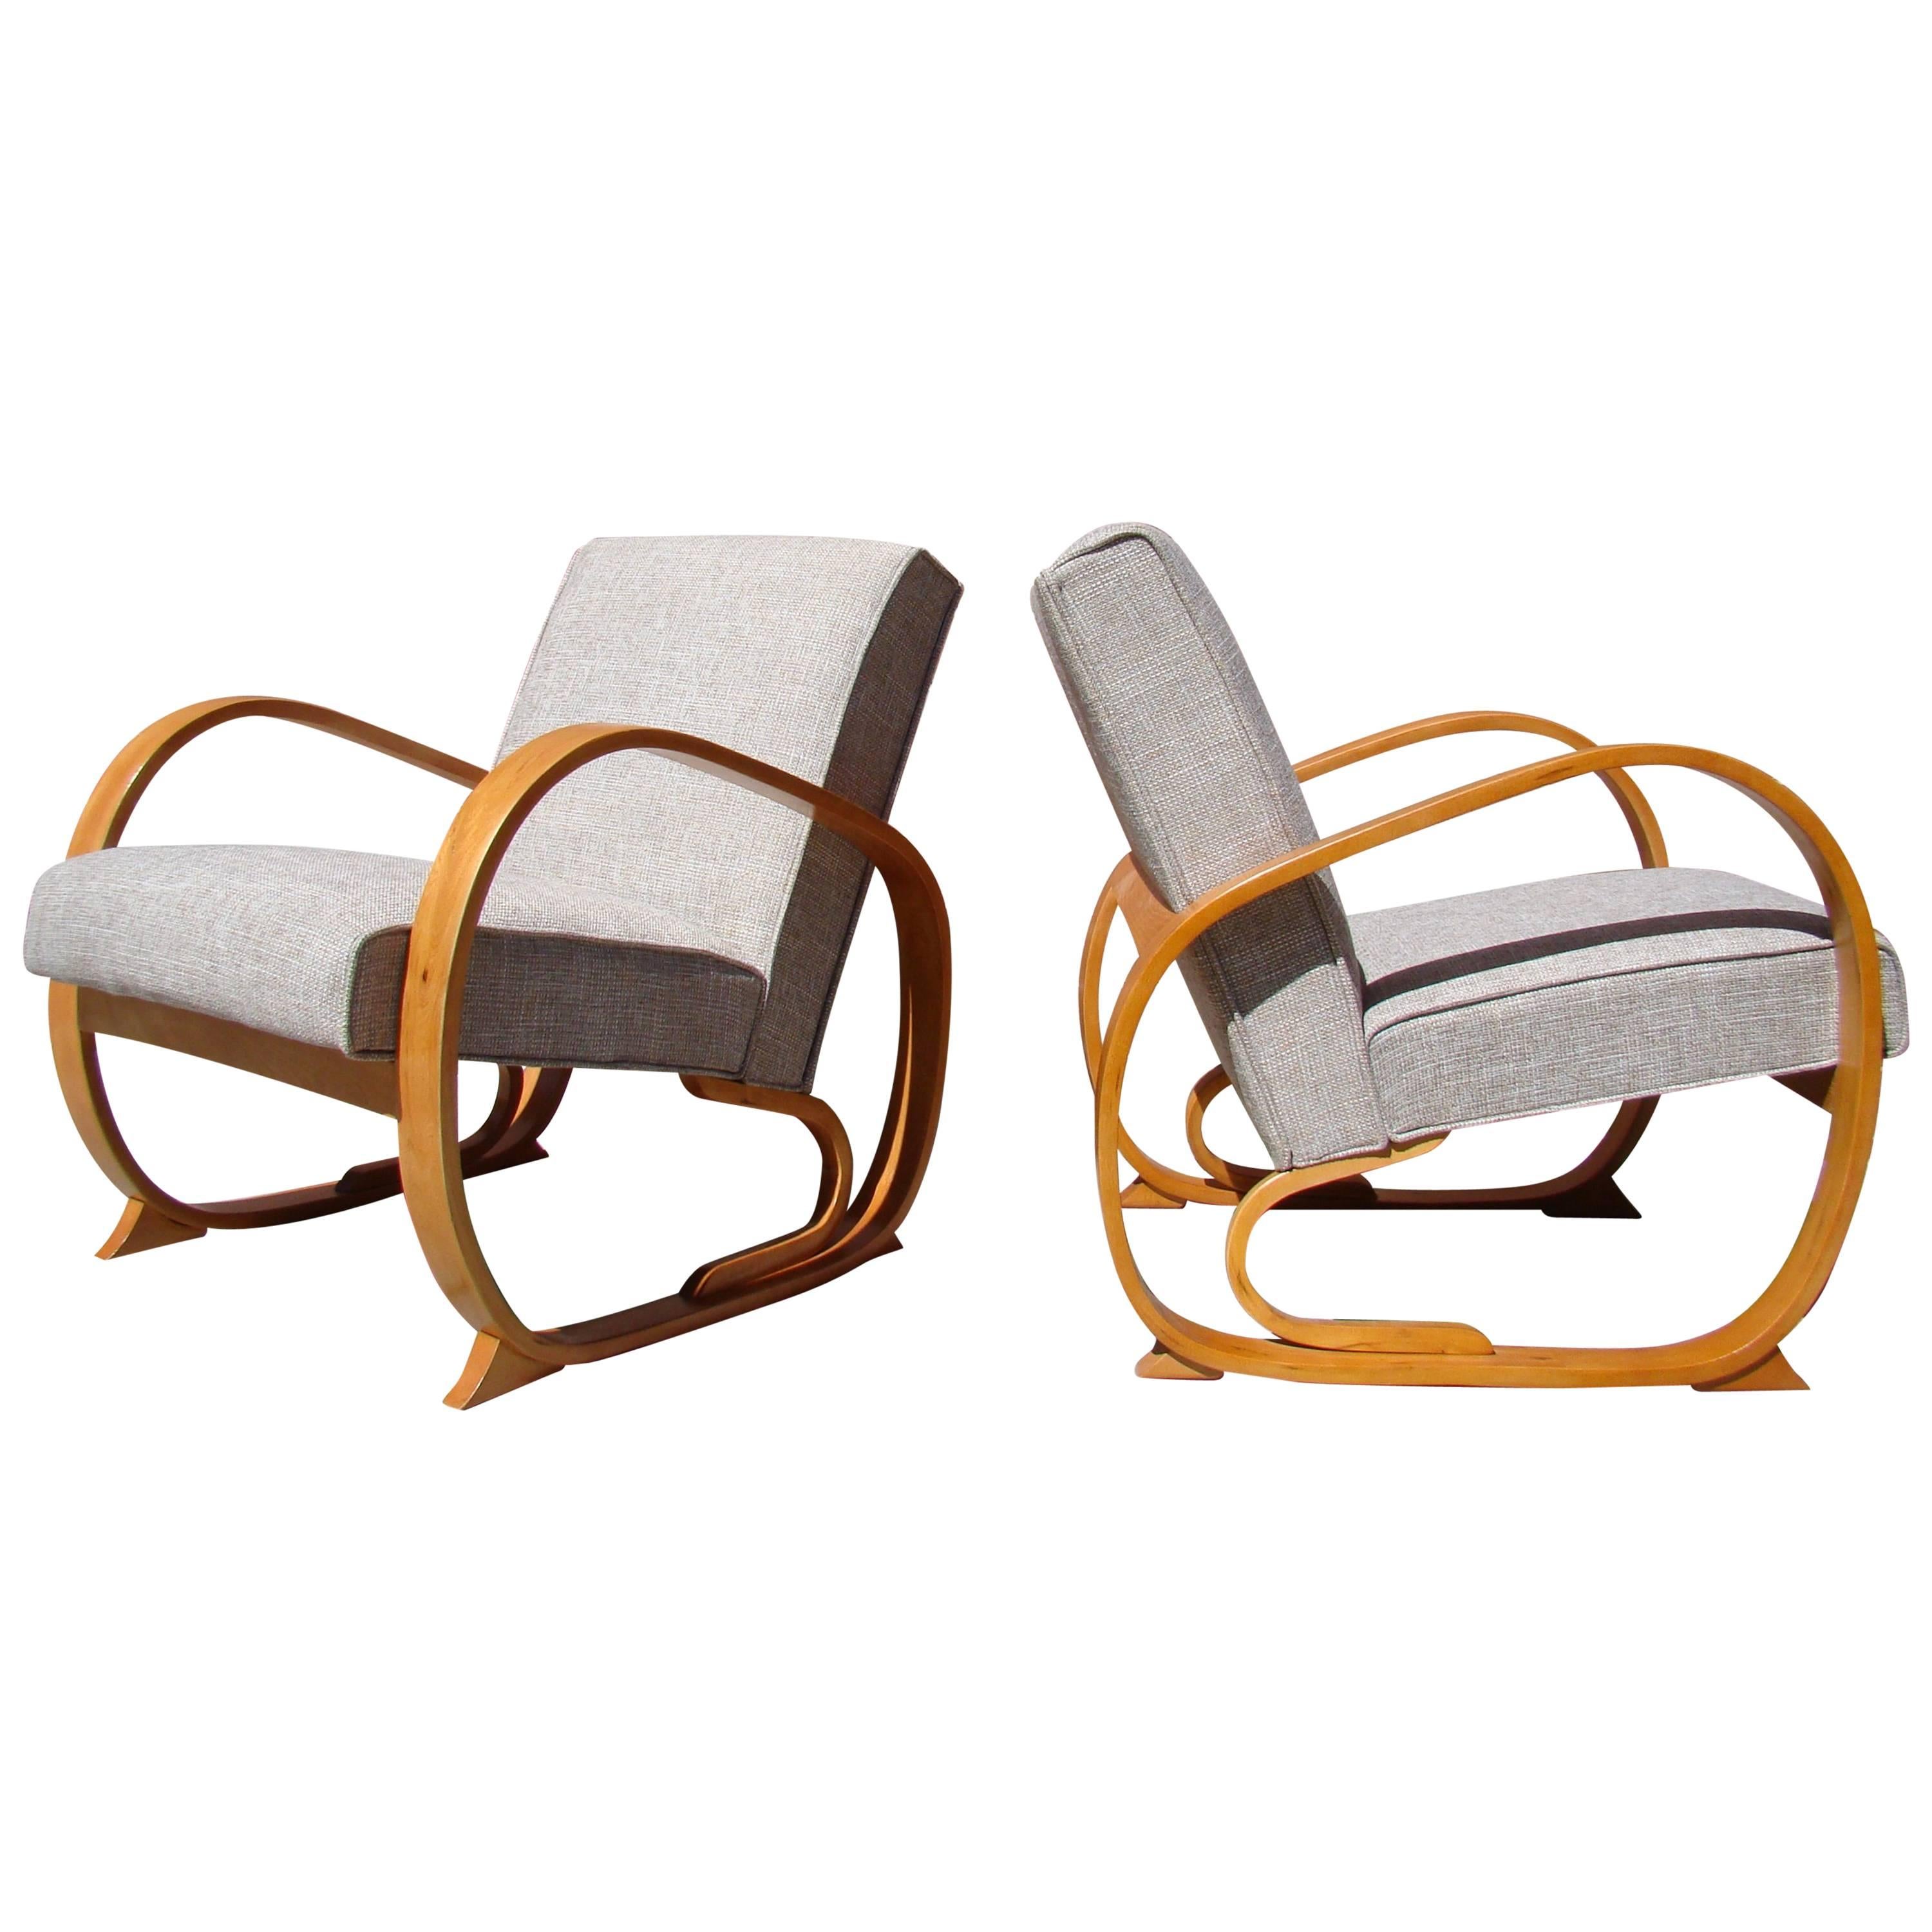 Stunning Pair of Machine Age Streamline Bentwood Lounge Chairs by Thonet